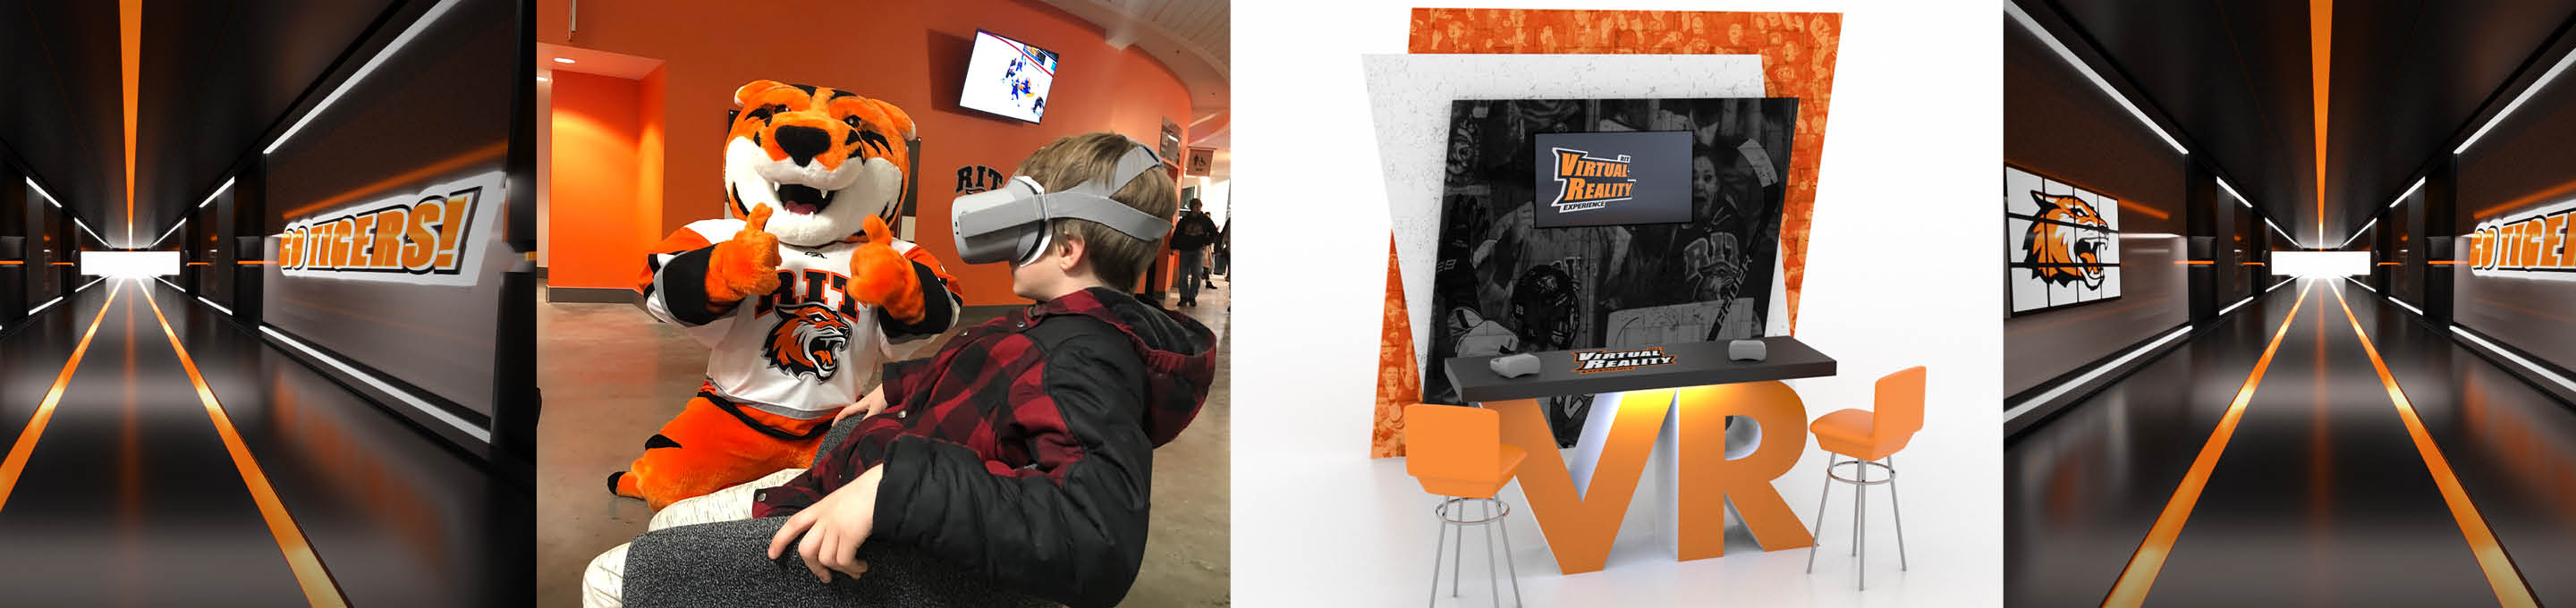 Images of Ritchie giving a thumbs up to a person using a VR headset